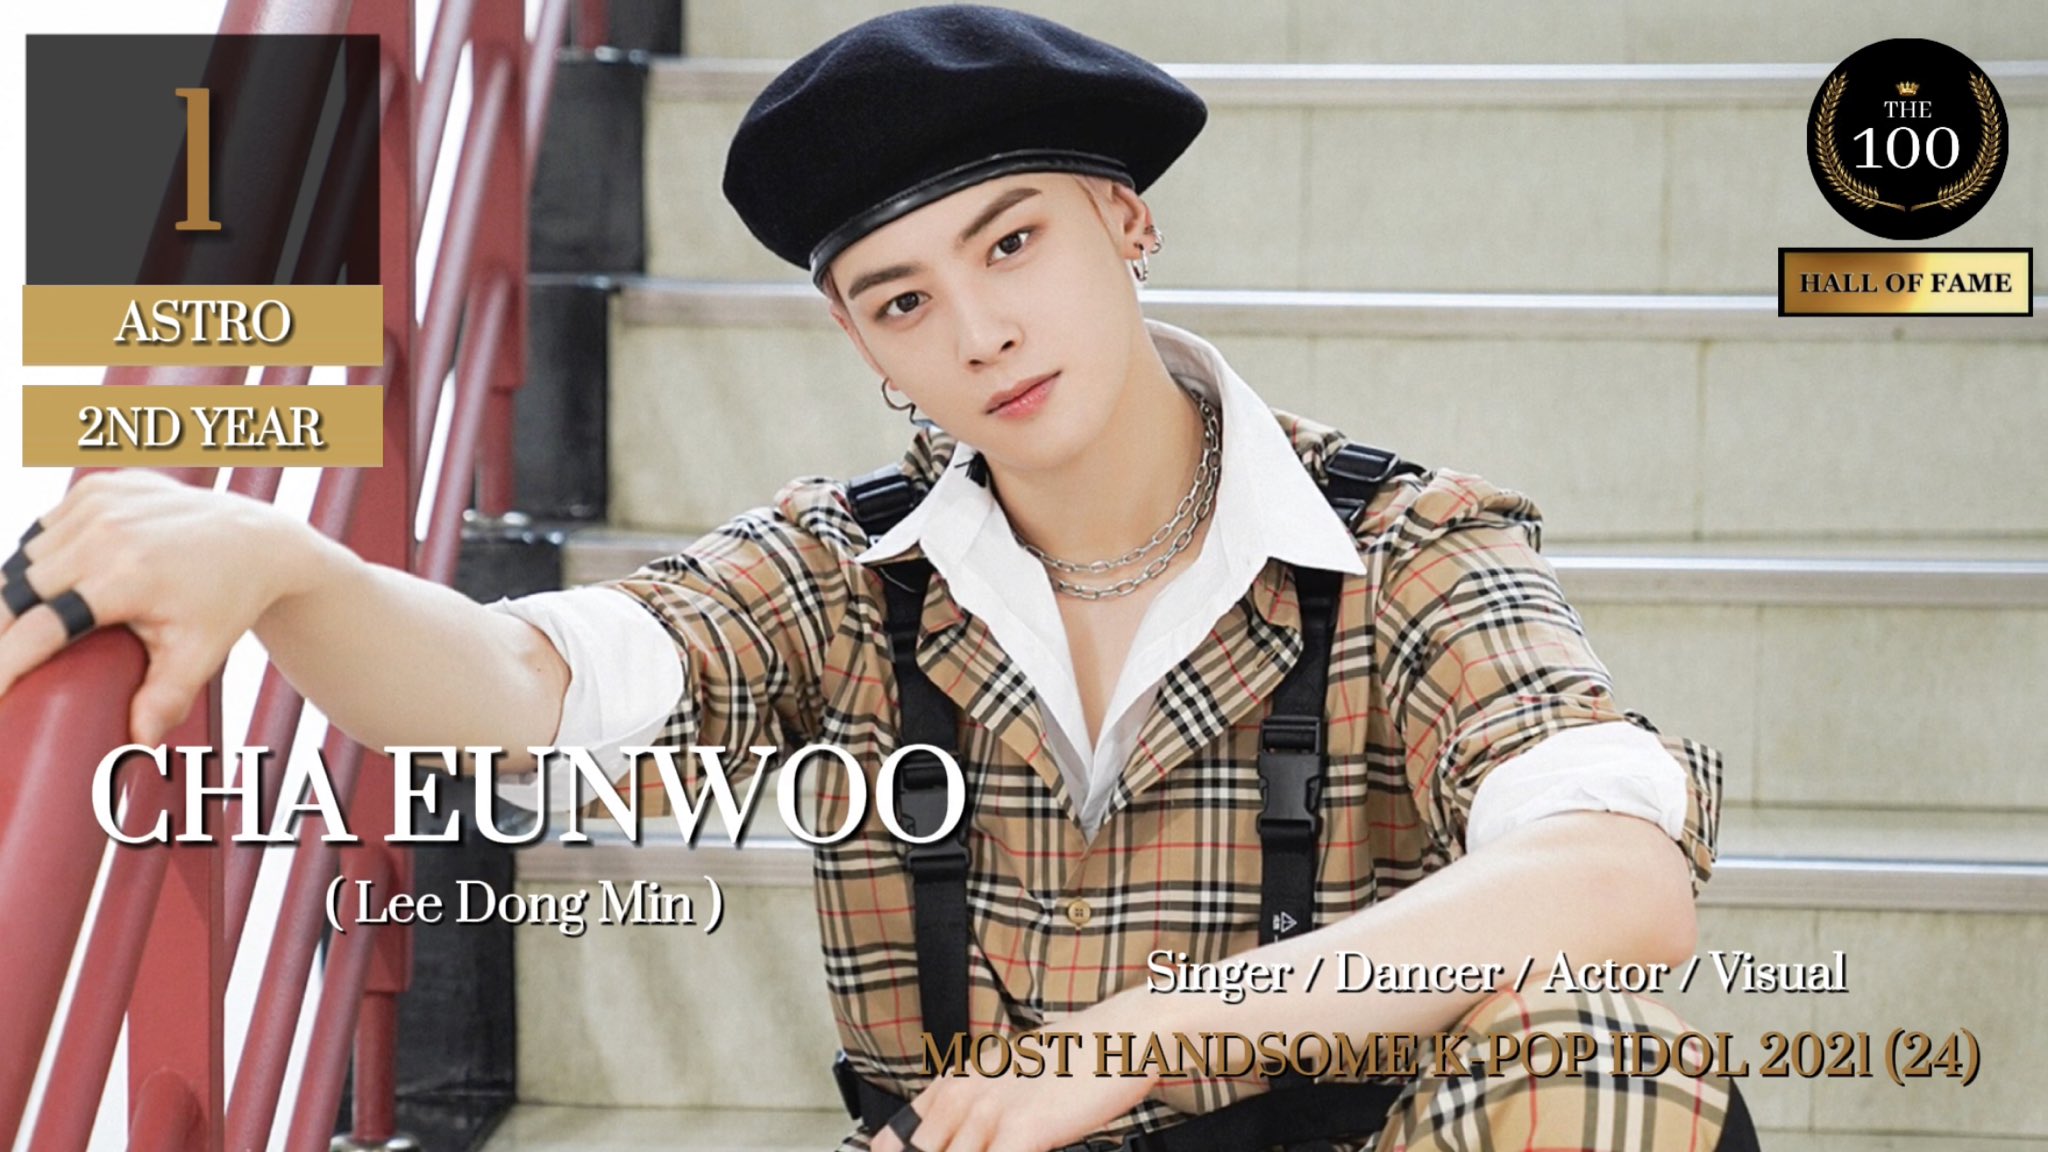 Cha Eunwoo - The 100 Most Handsome Men in the World 2021